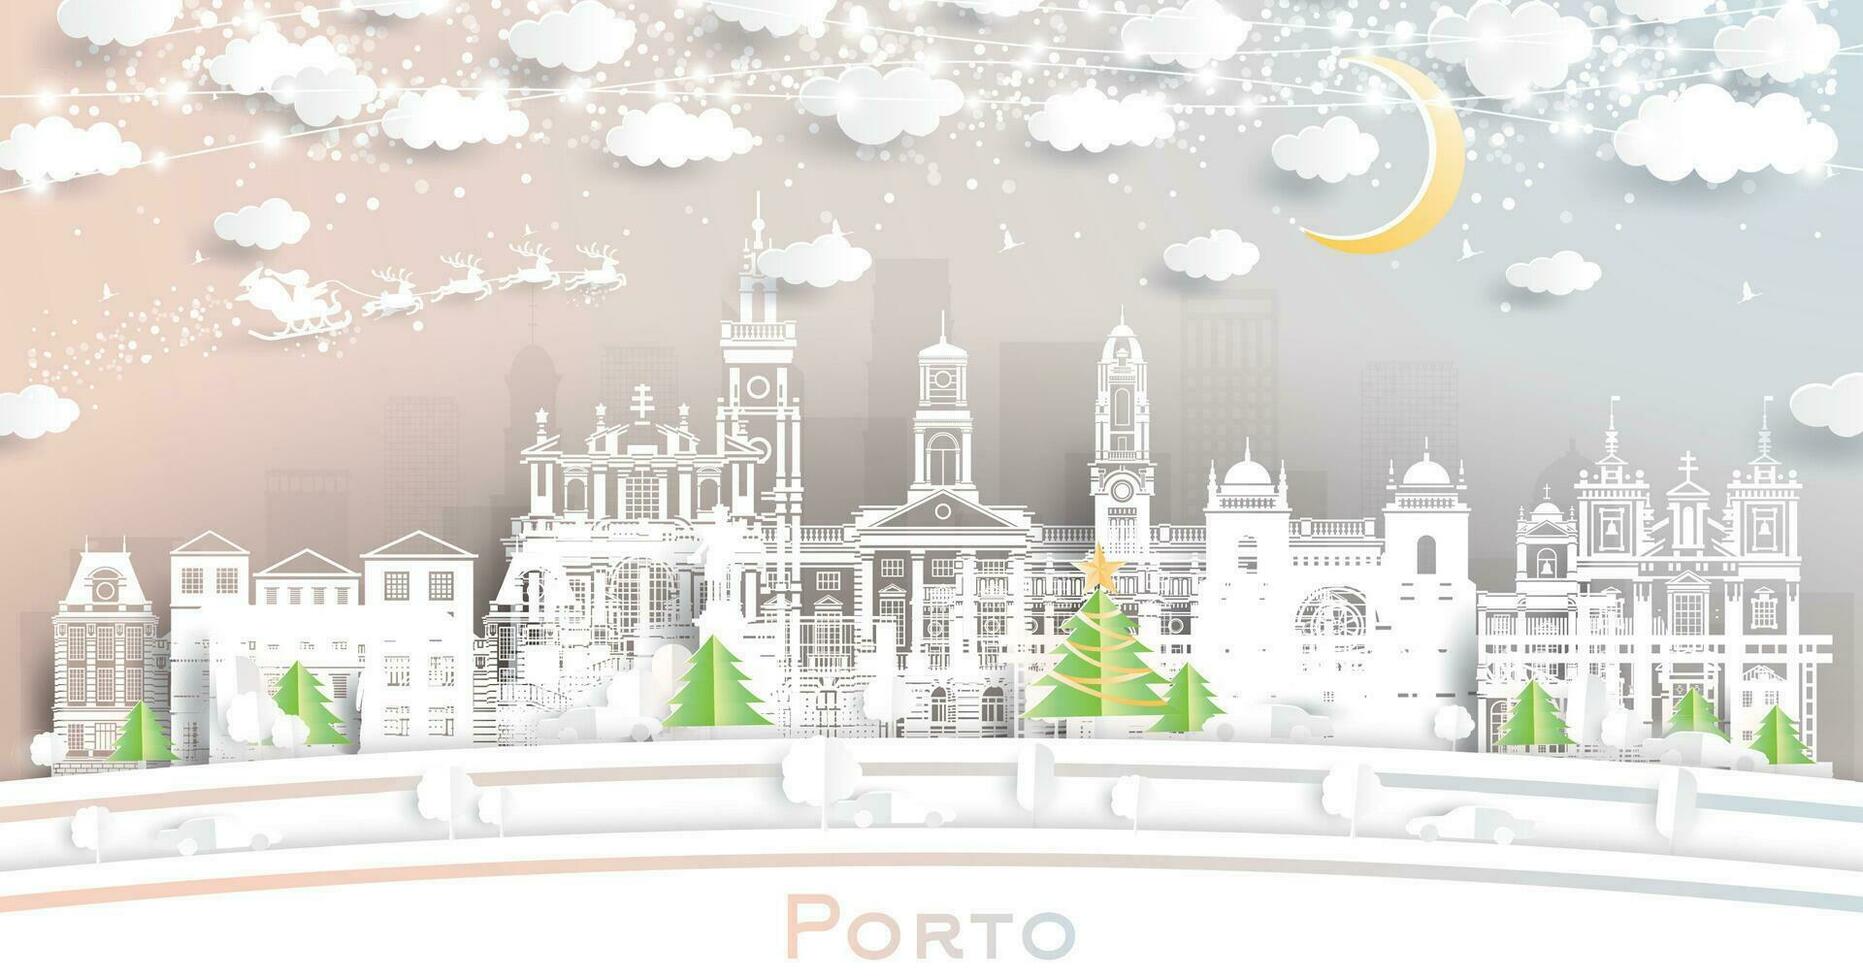 Porto Portugal. Winter City Skyline in Paper Cut Style with Snowflakes, Moon and Neon Garland. Christmas, New Year Concept. Porto Cityscape with Landmarks. vector